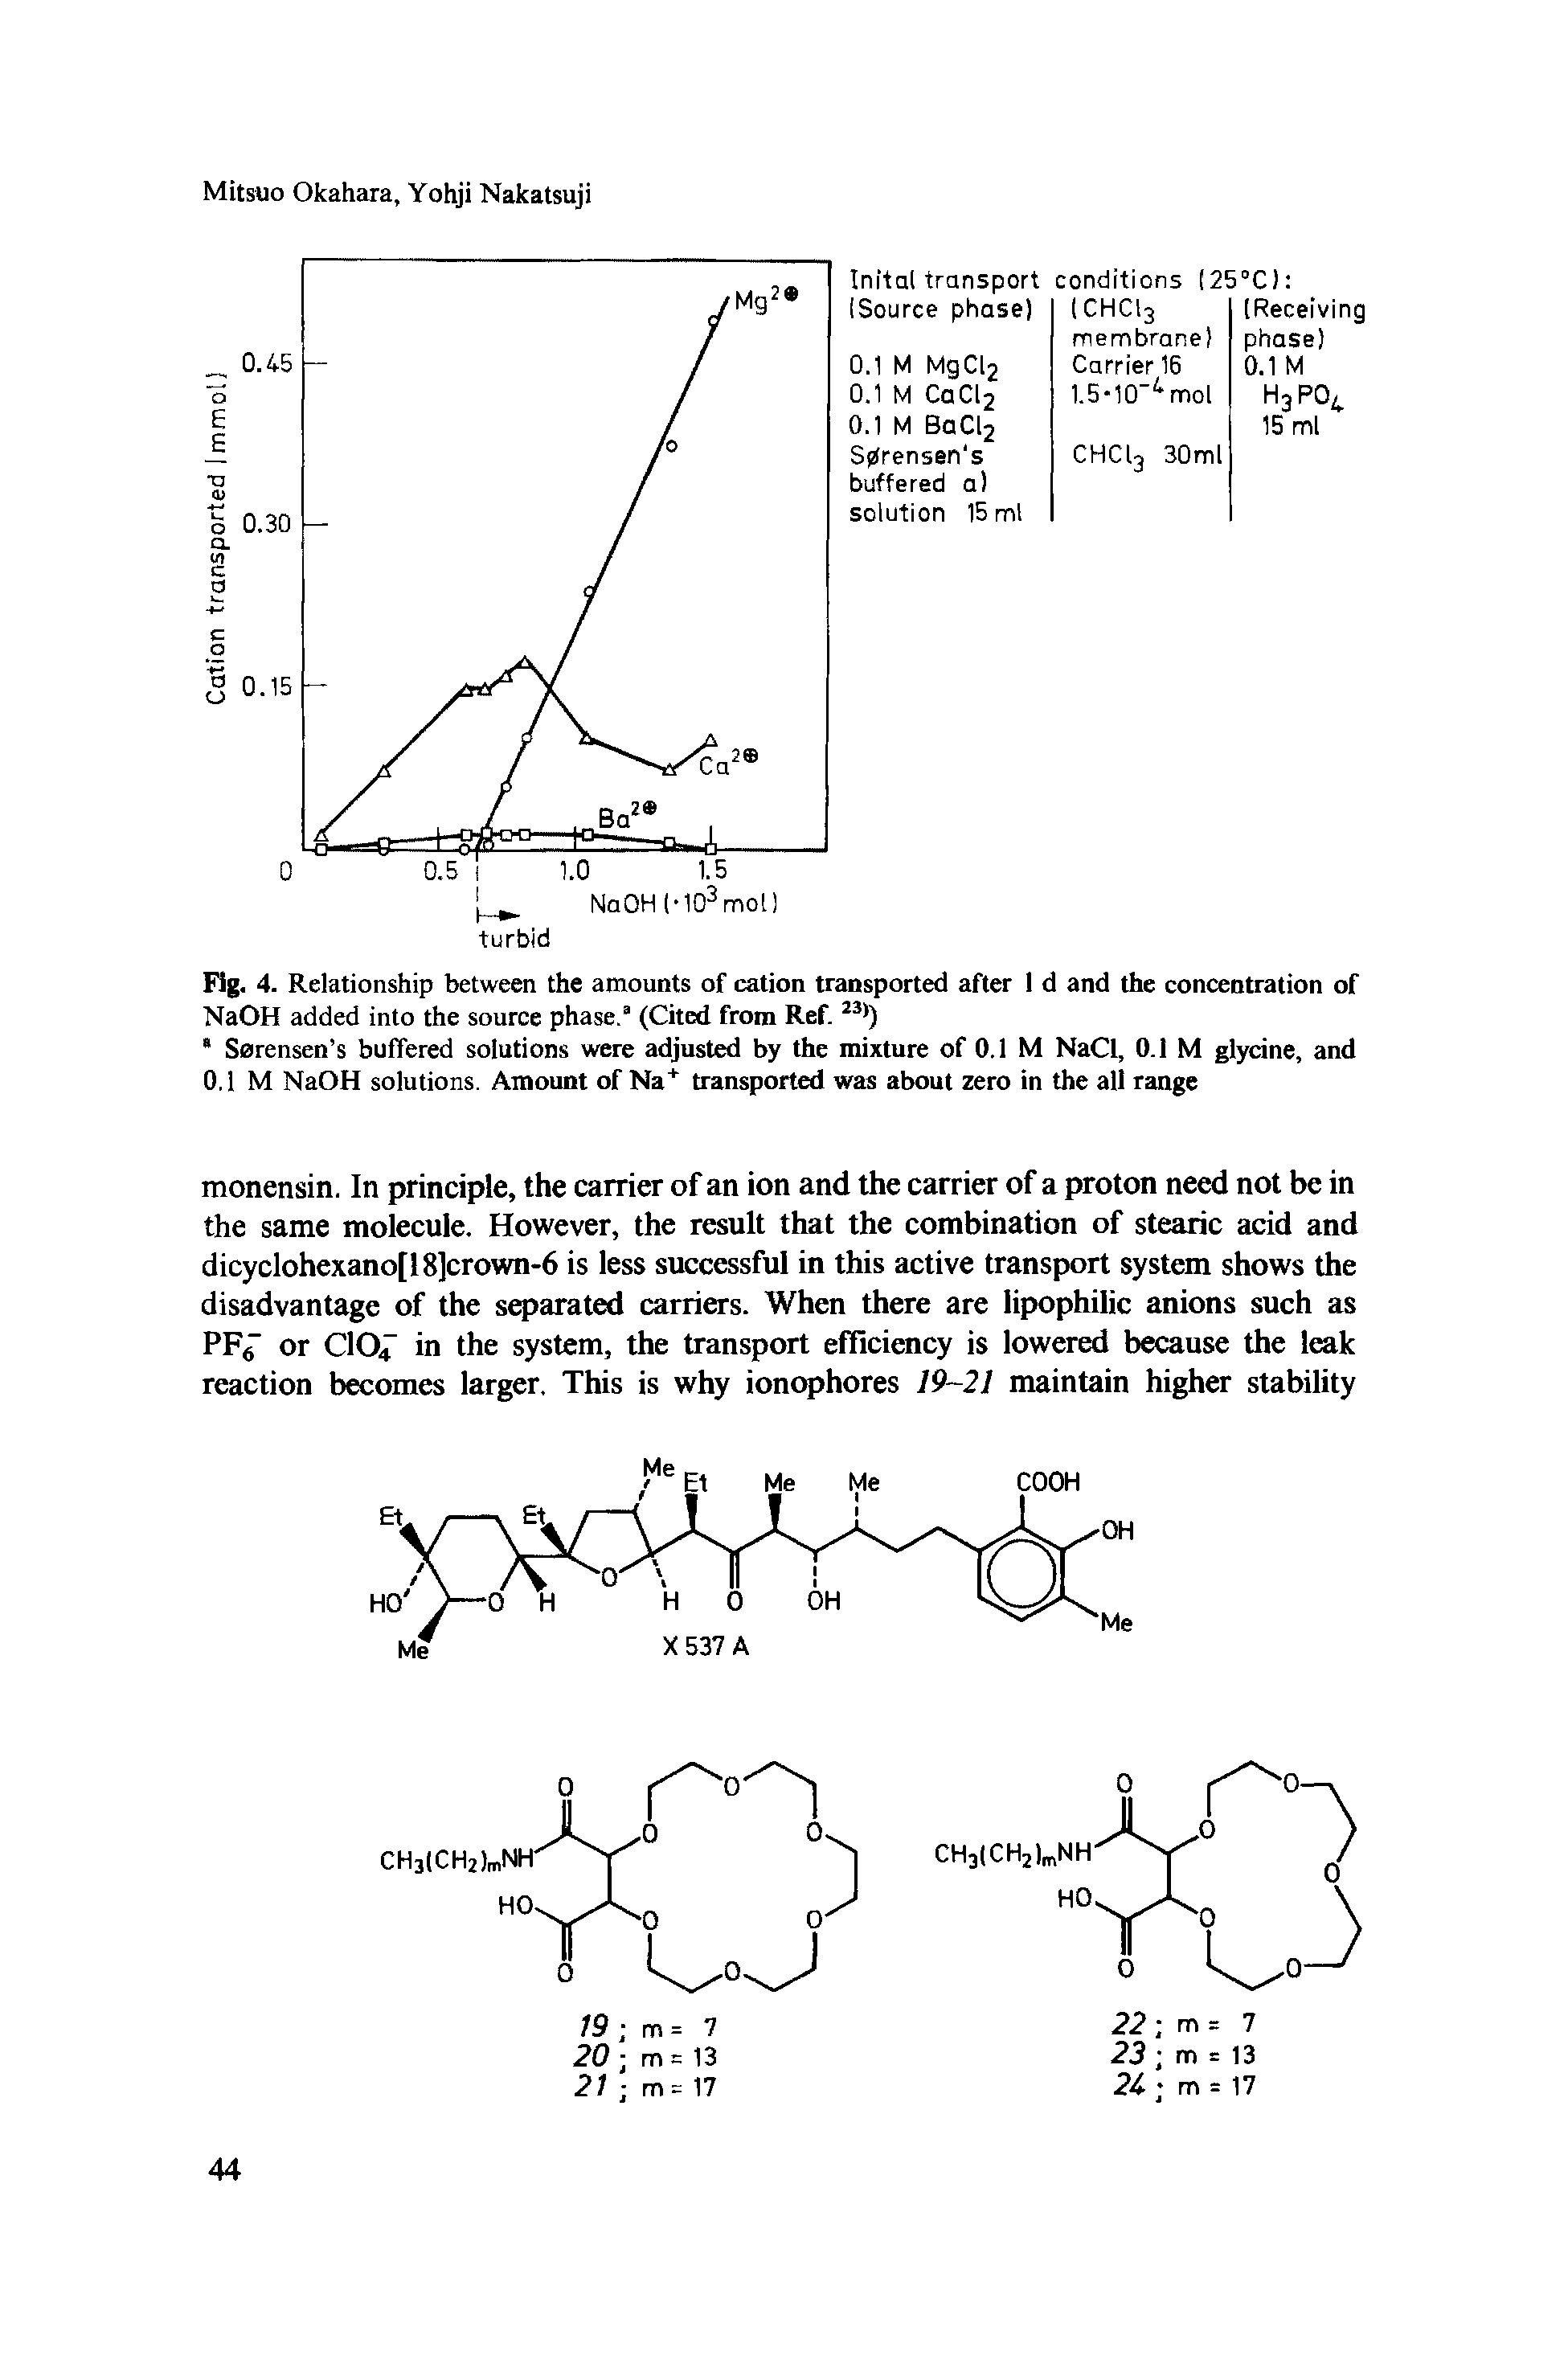 Fig. 4. Relationship between the amounts of cation transported after 1 d and the concentration of NaOH added into the source phase.3 (Cited from Ref. 23))...